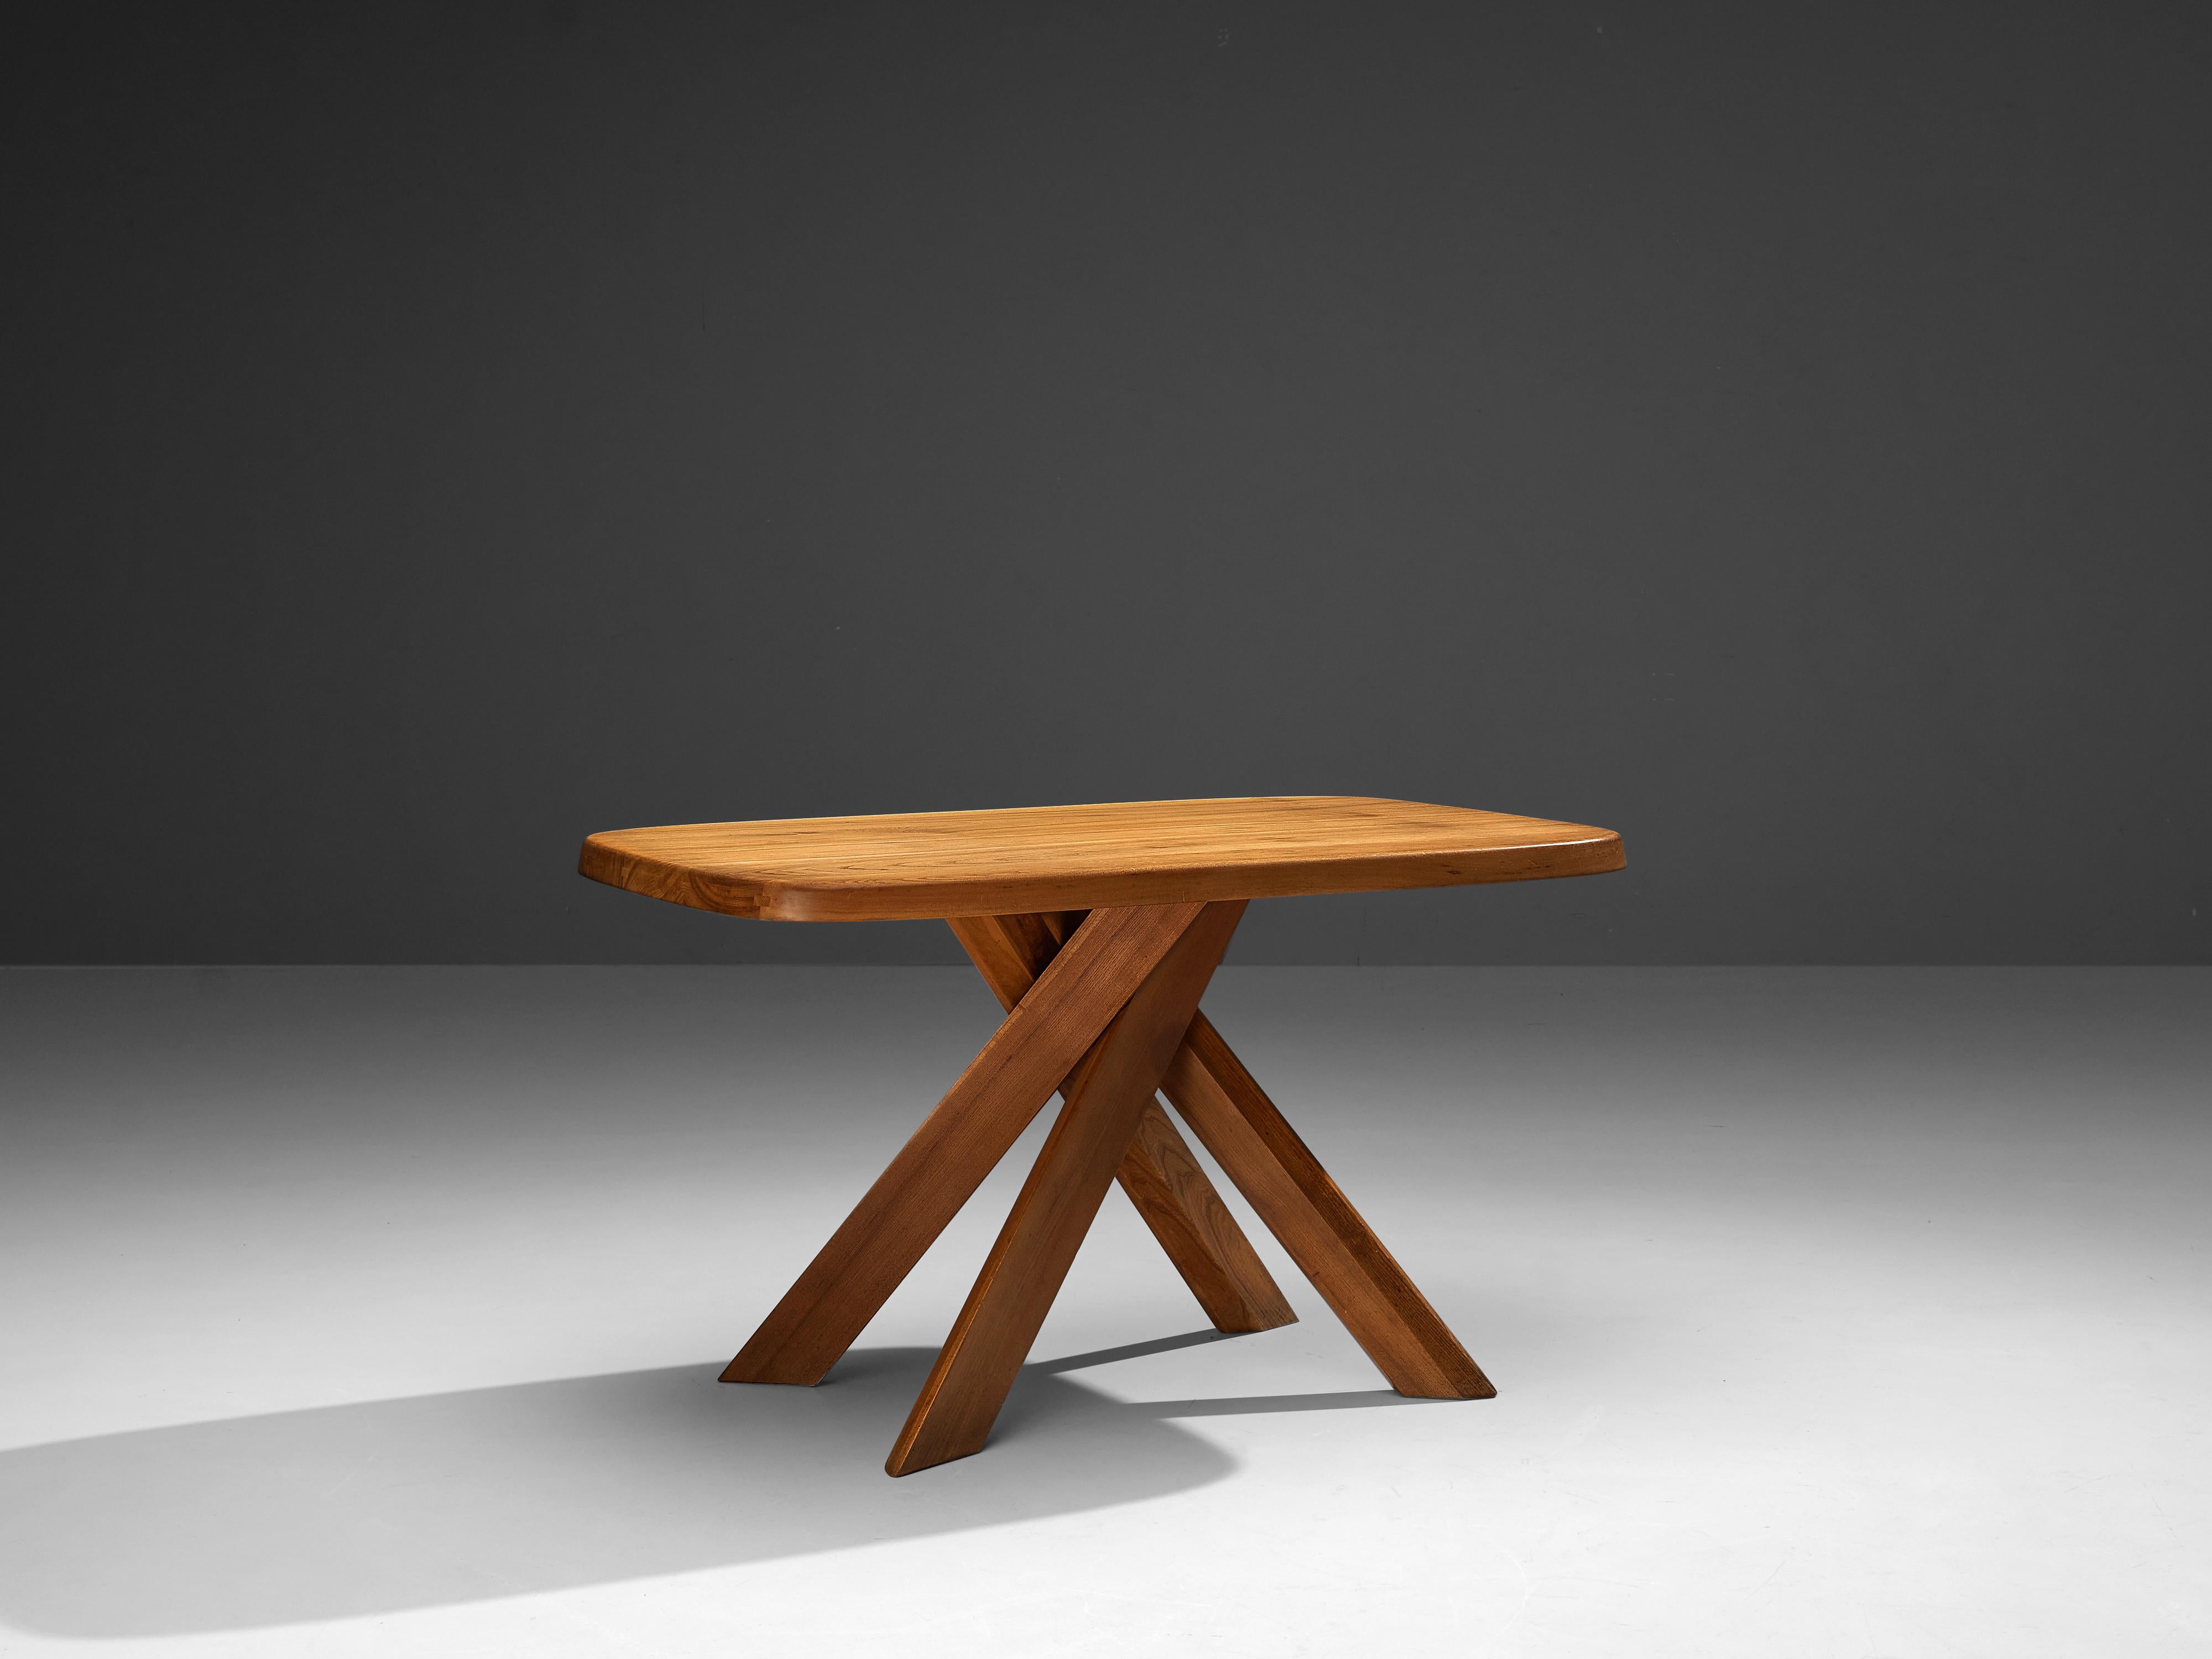 Pierre Chapo, dining table 'Aban T35B', elm, France, 1960s

This small dining or writing table in solid elm is designed by master woodworker Pierre Chapo. The basic design and construction as well as the use of solid elm wood characterizes the